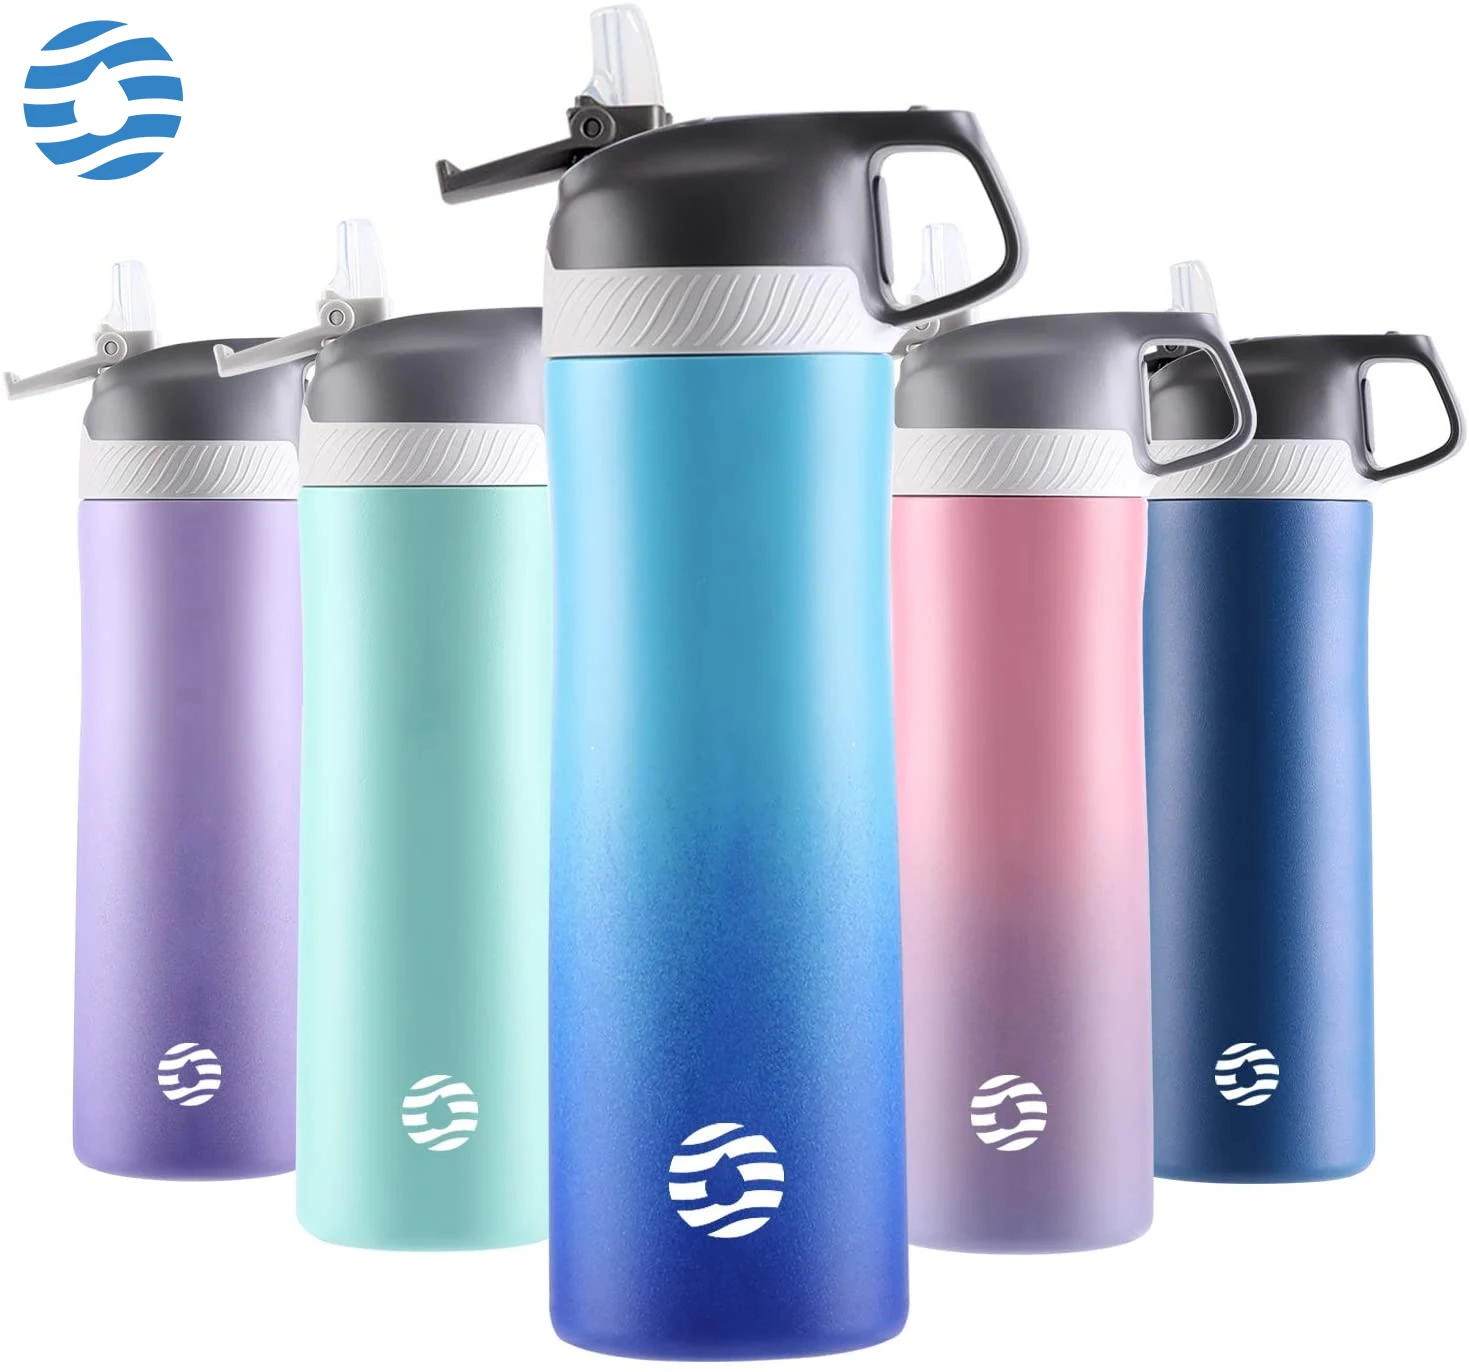 https://ae01.alicdn.com/kf/S7589874f212443b79bb08fd3e7a9db48h/FJbottle-Insulated-Water-Bottle-with-Straw-Lid-20oz-550ml-Stainless-Steel-Double-Wall-Vacuum-Water-Bottle.jpg